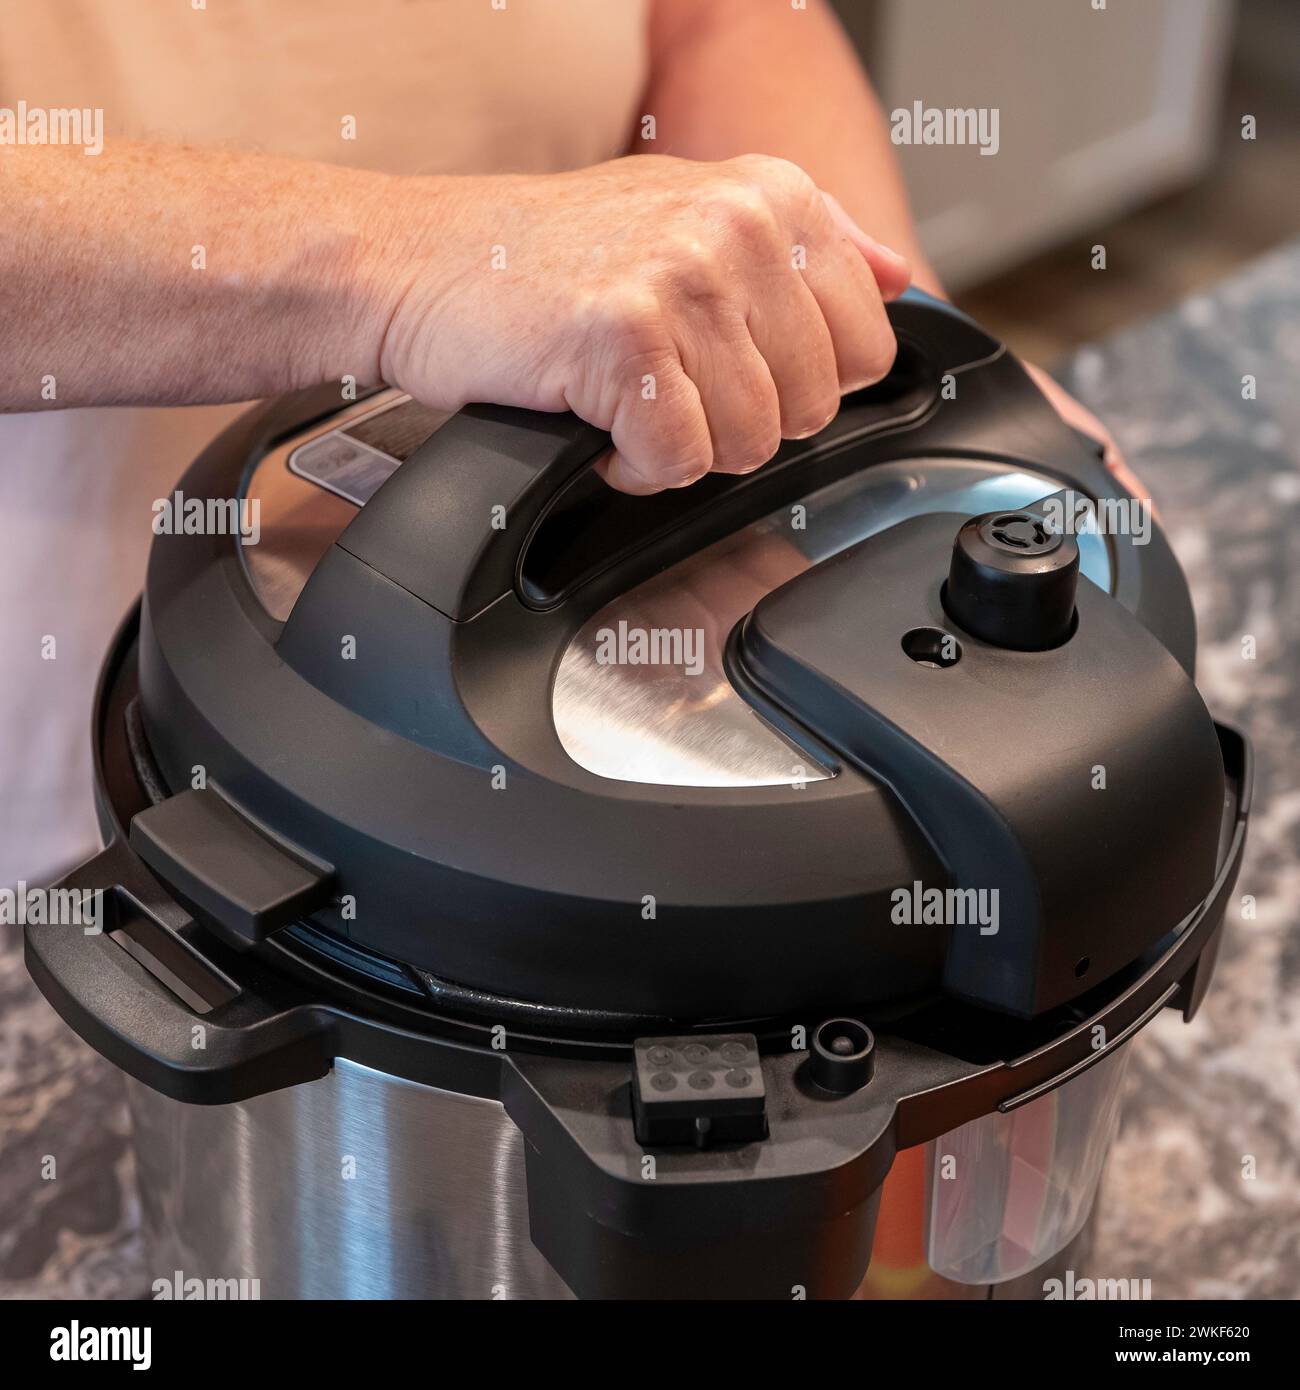 Fingers of a womans hand are curled around the handle of the cover of a modern electric pressure cooker or instant pot. Stock Photo